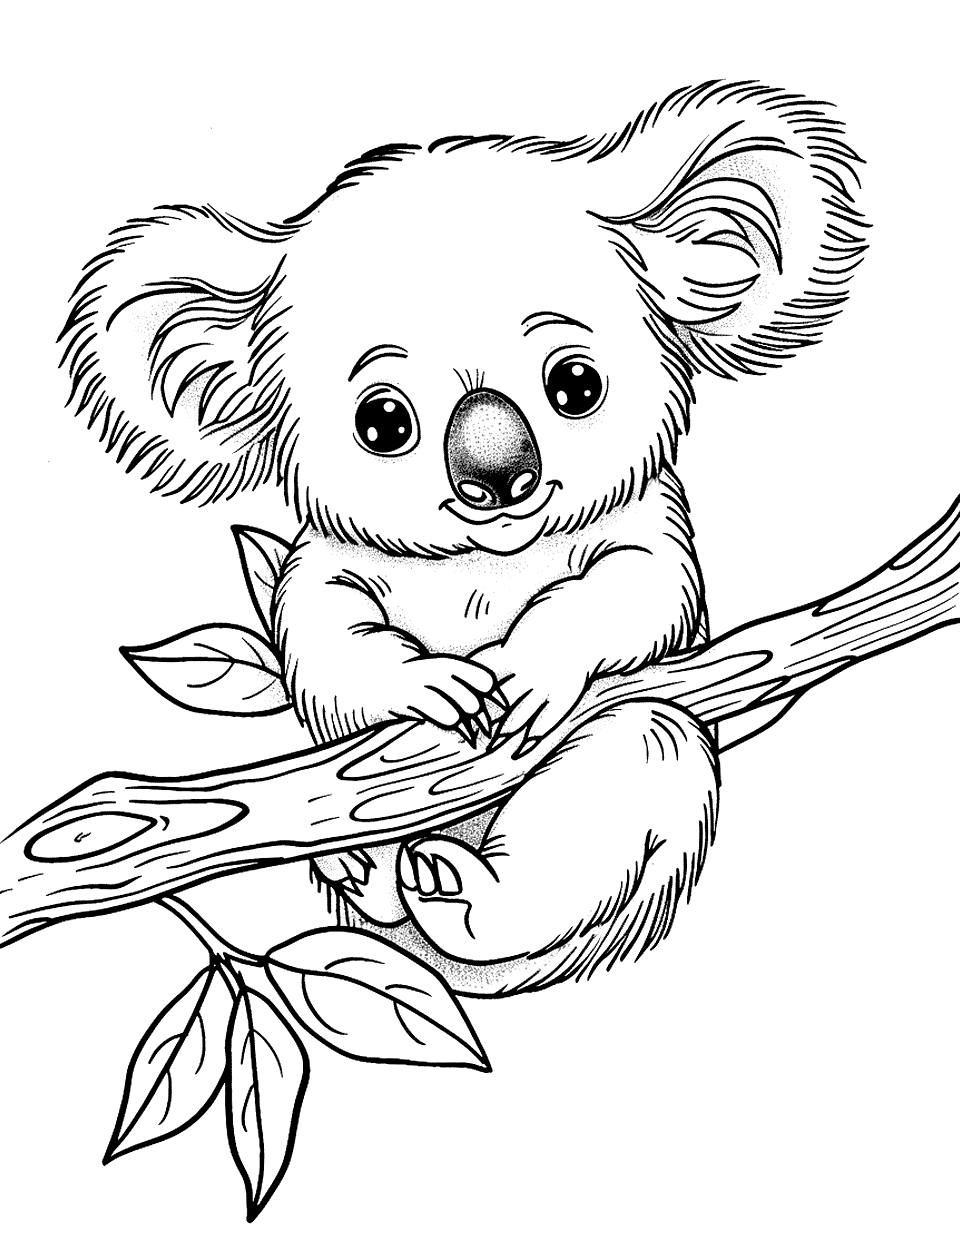 Playful Baby Koala Coloring Page - A baby koala playfully hanging from a tree branch.